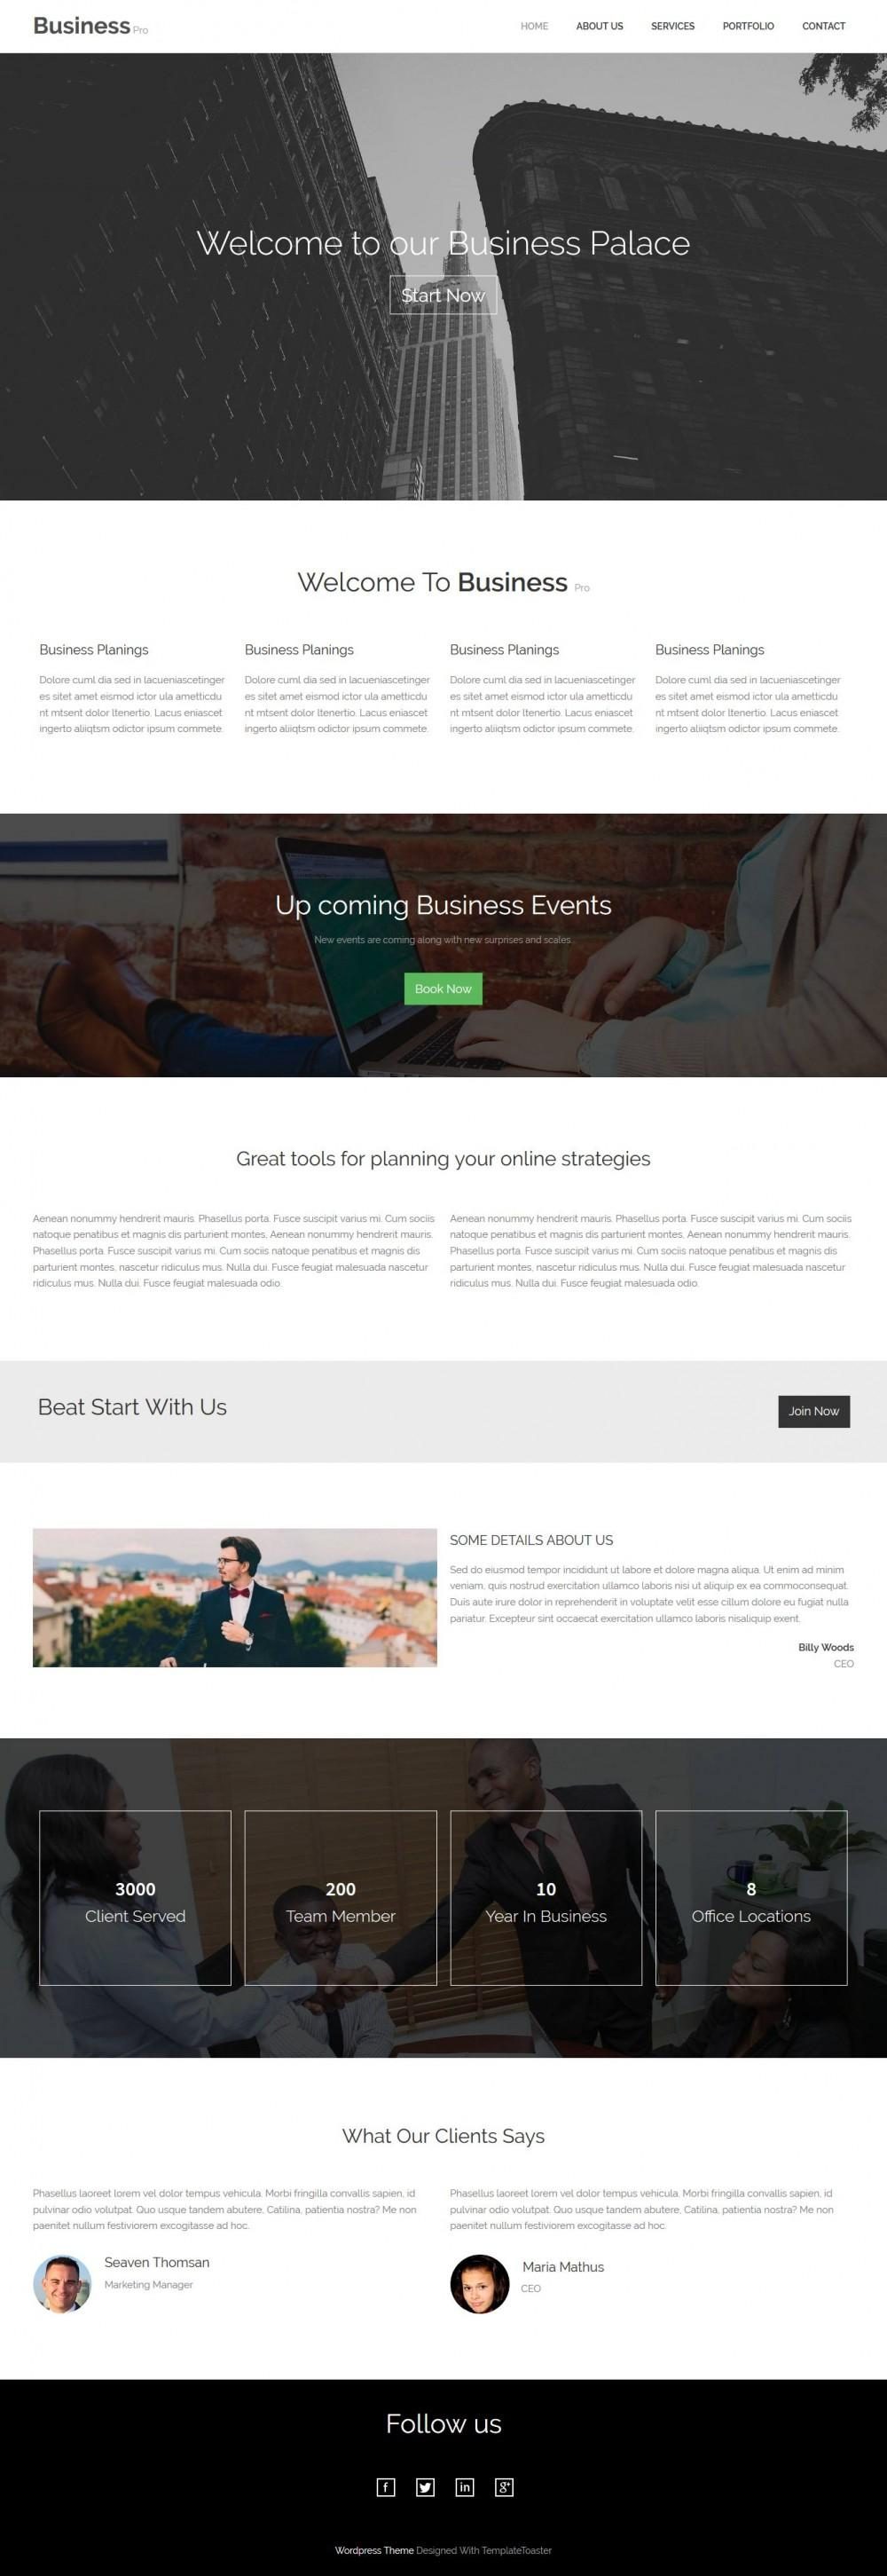 Business Consultant - Marketing And Business Consultant WordPress Theme